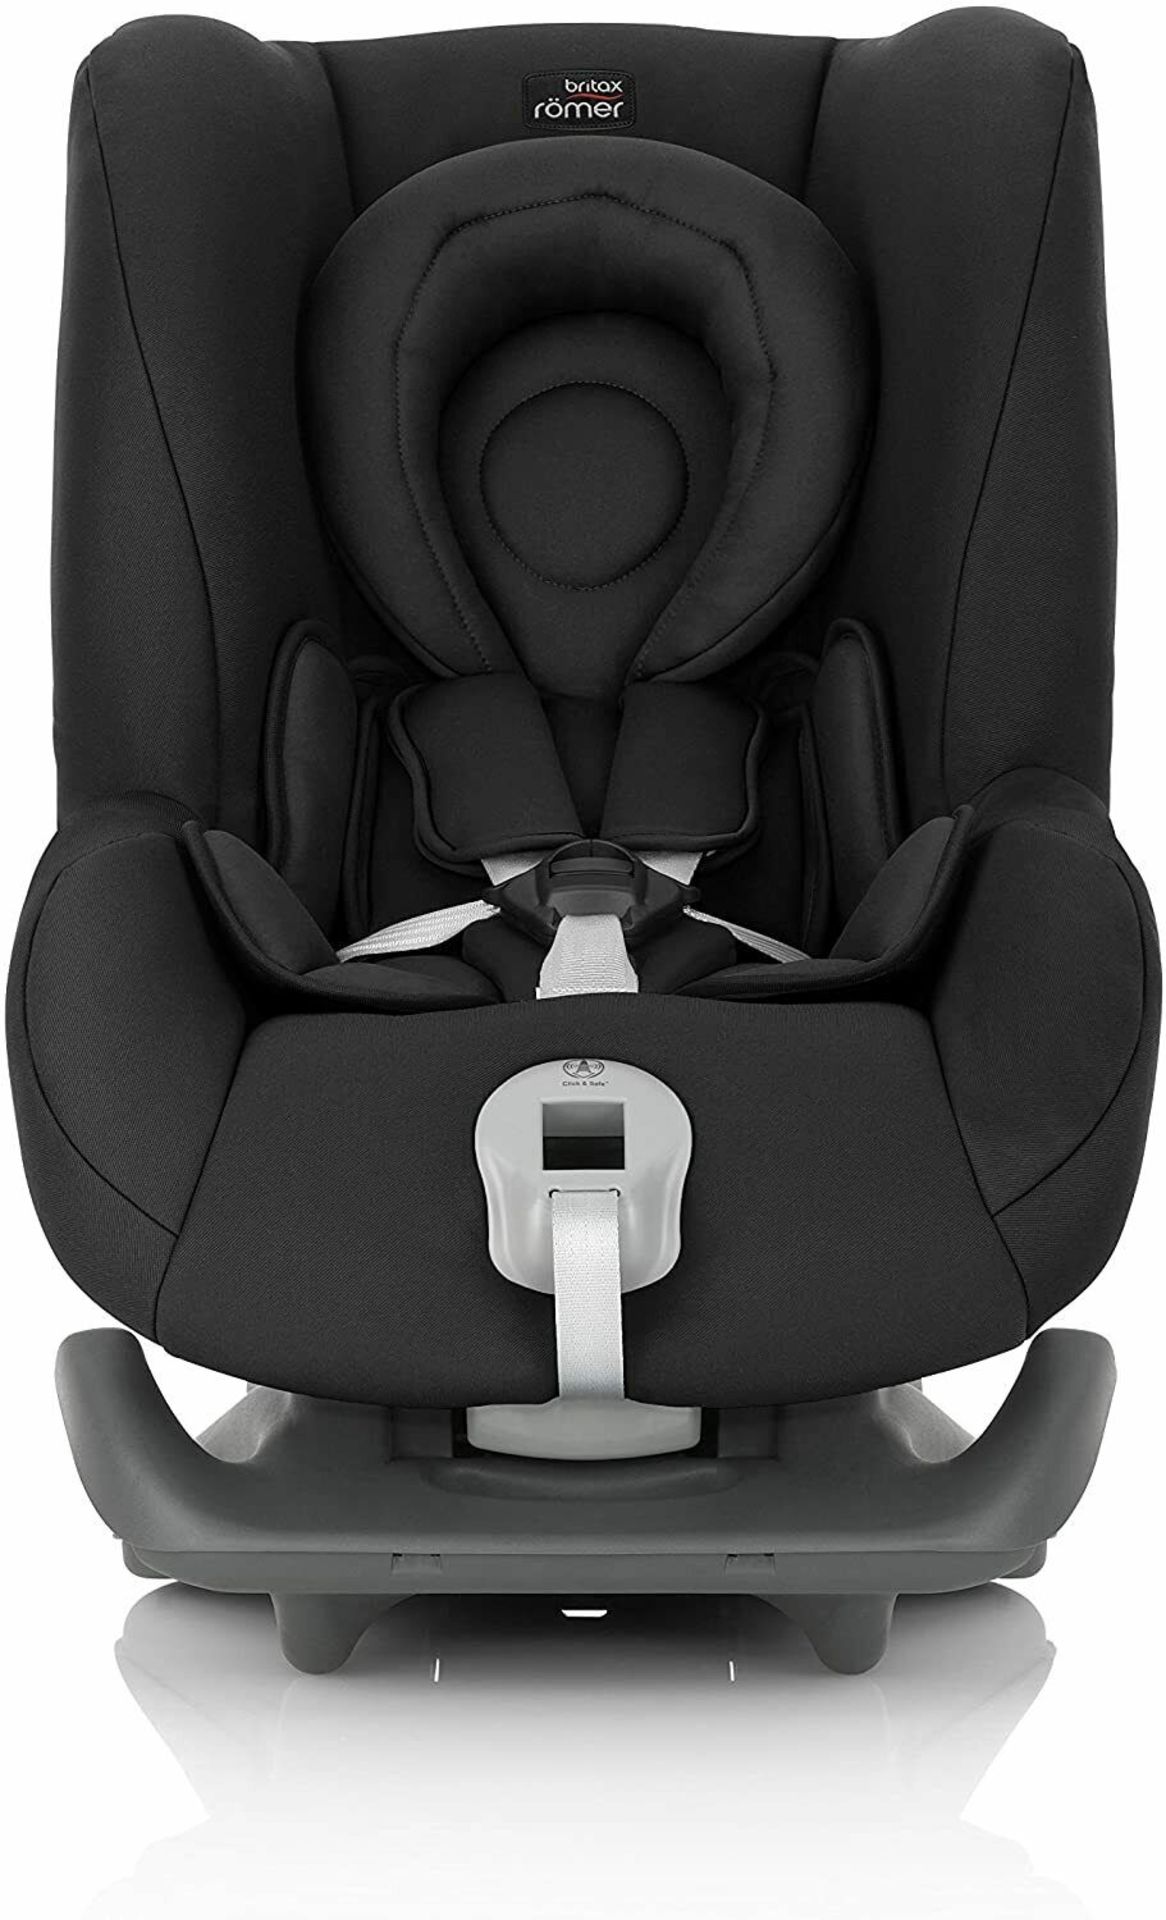 new britax römer first class plus br cosmos black car seat rrp £199 - Image 4 of 4